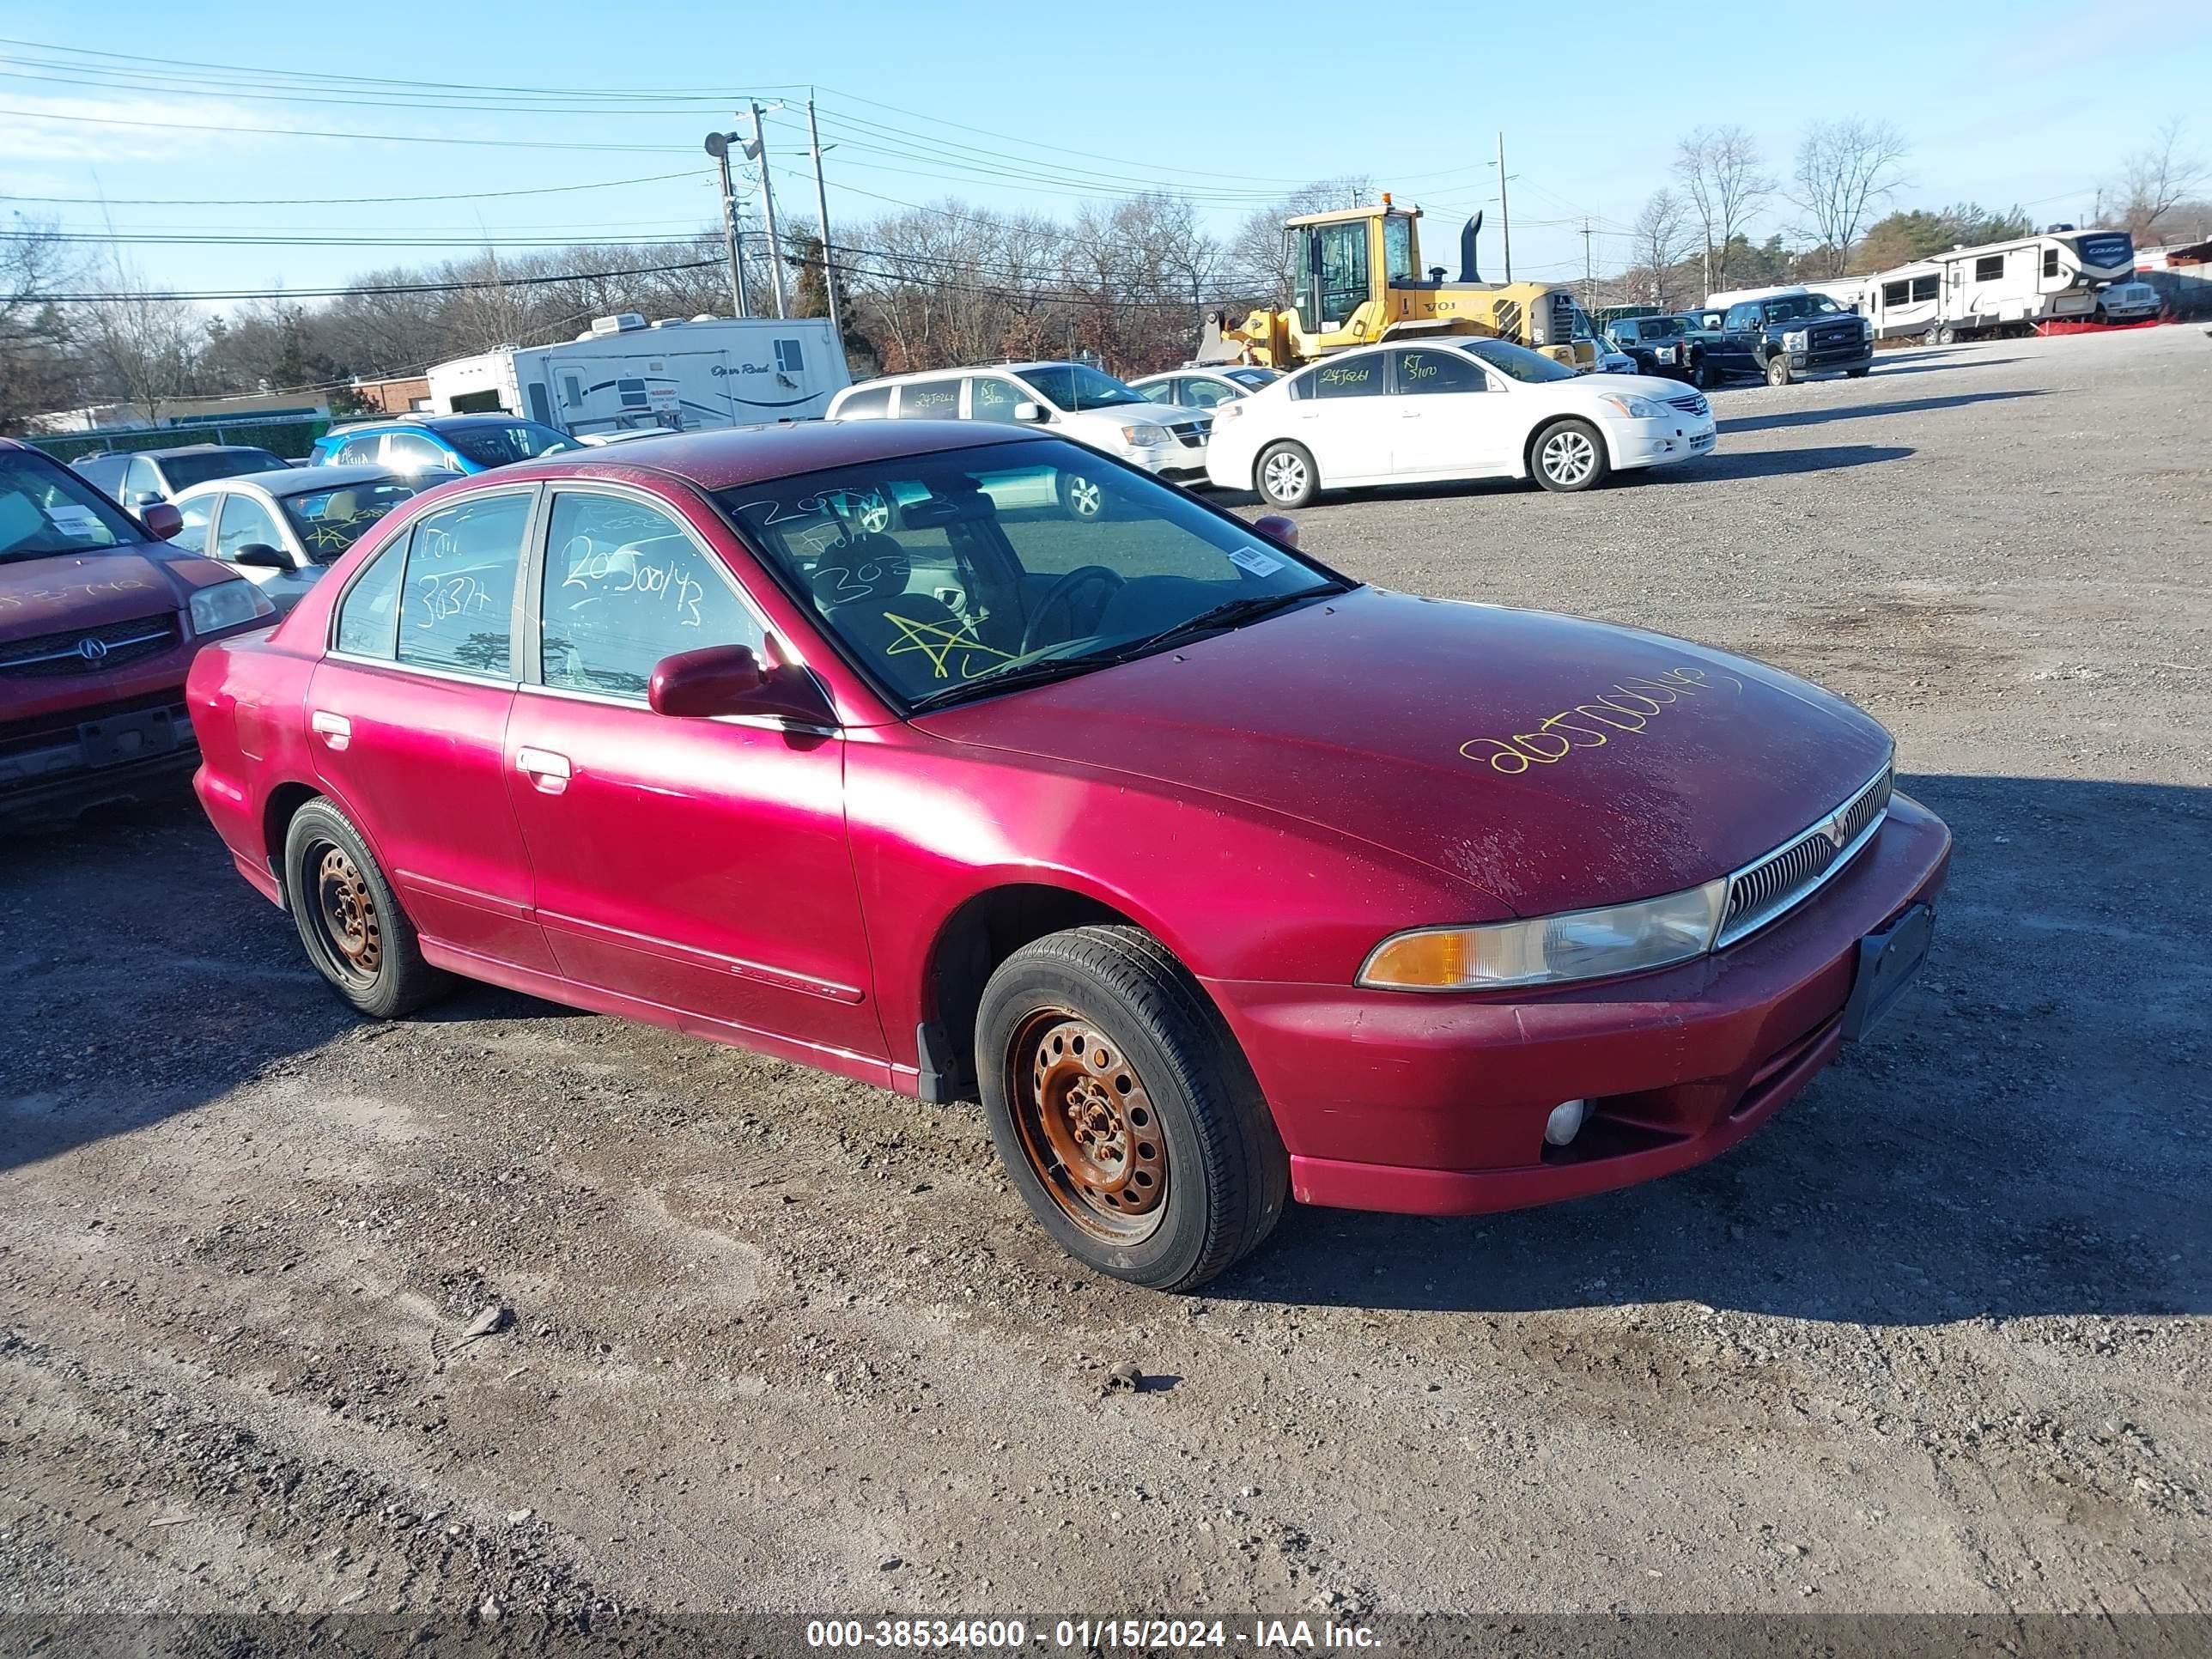 vin: 4A3AA46G5YE087757 4A3AA46G5YE087757 2000 mitsubishi galant 2400 for Sale in 11763, 139 Peconic Ave, Medford, New York, USA